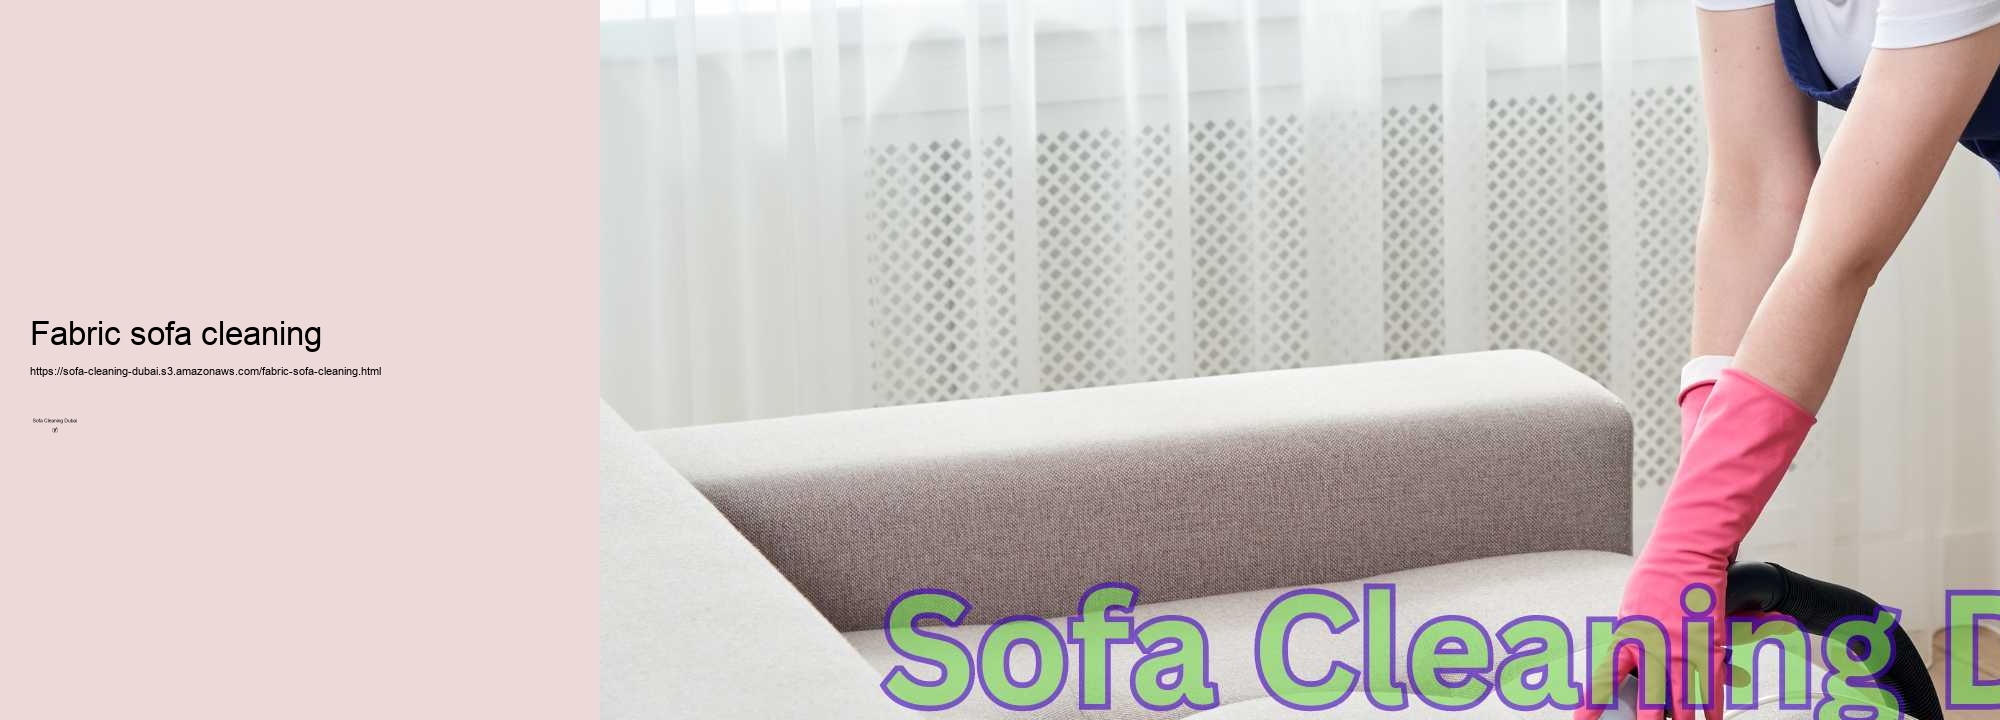 Fabric sofa cleaning